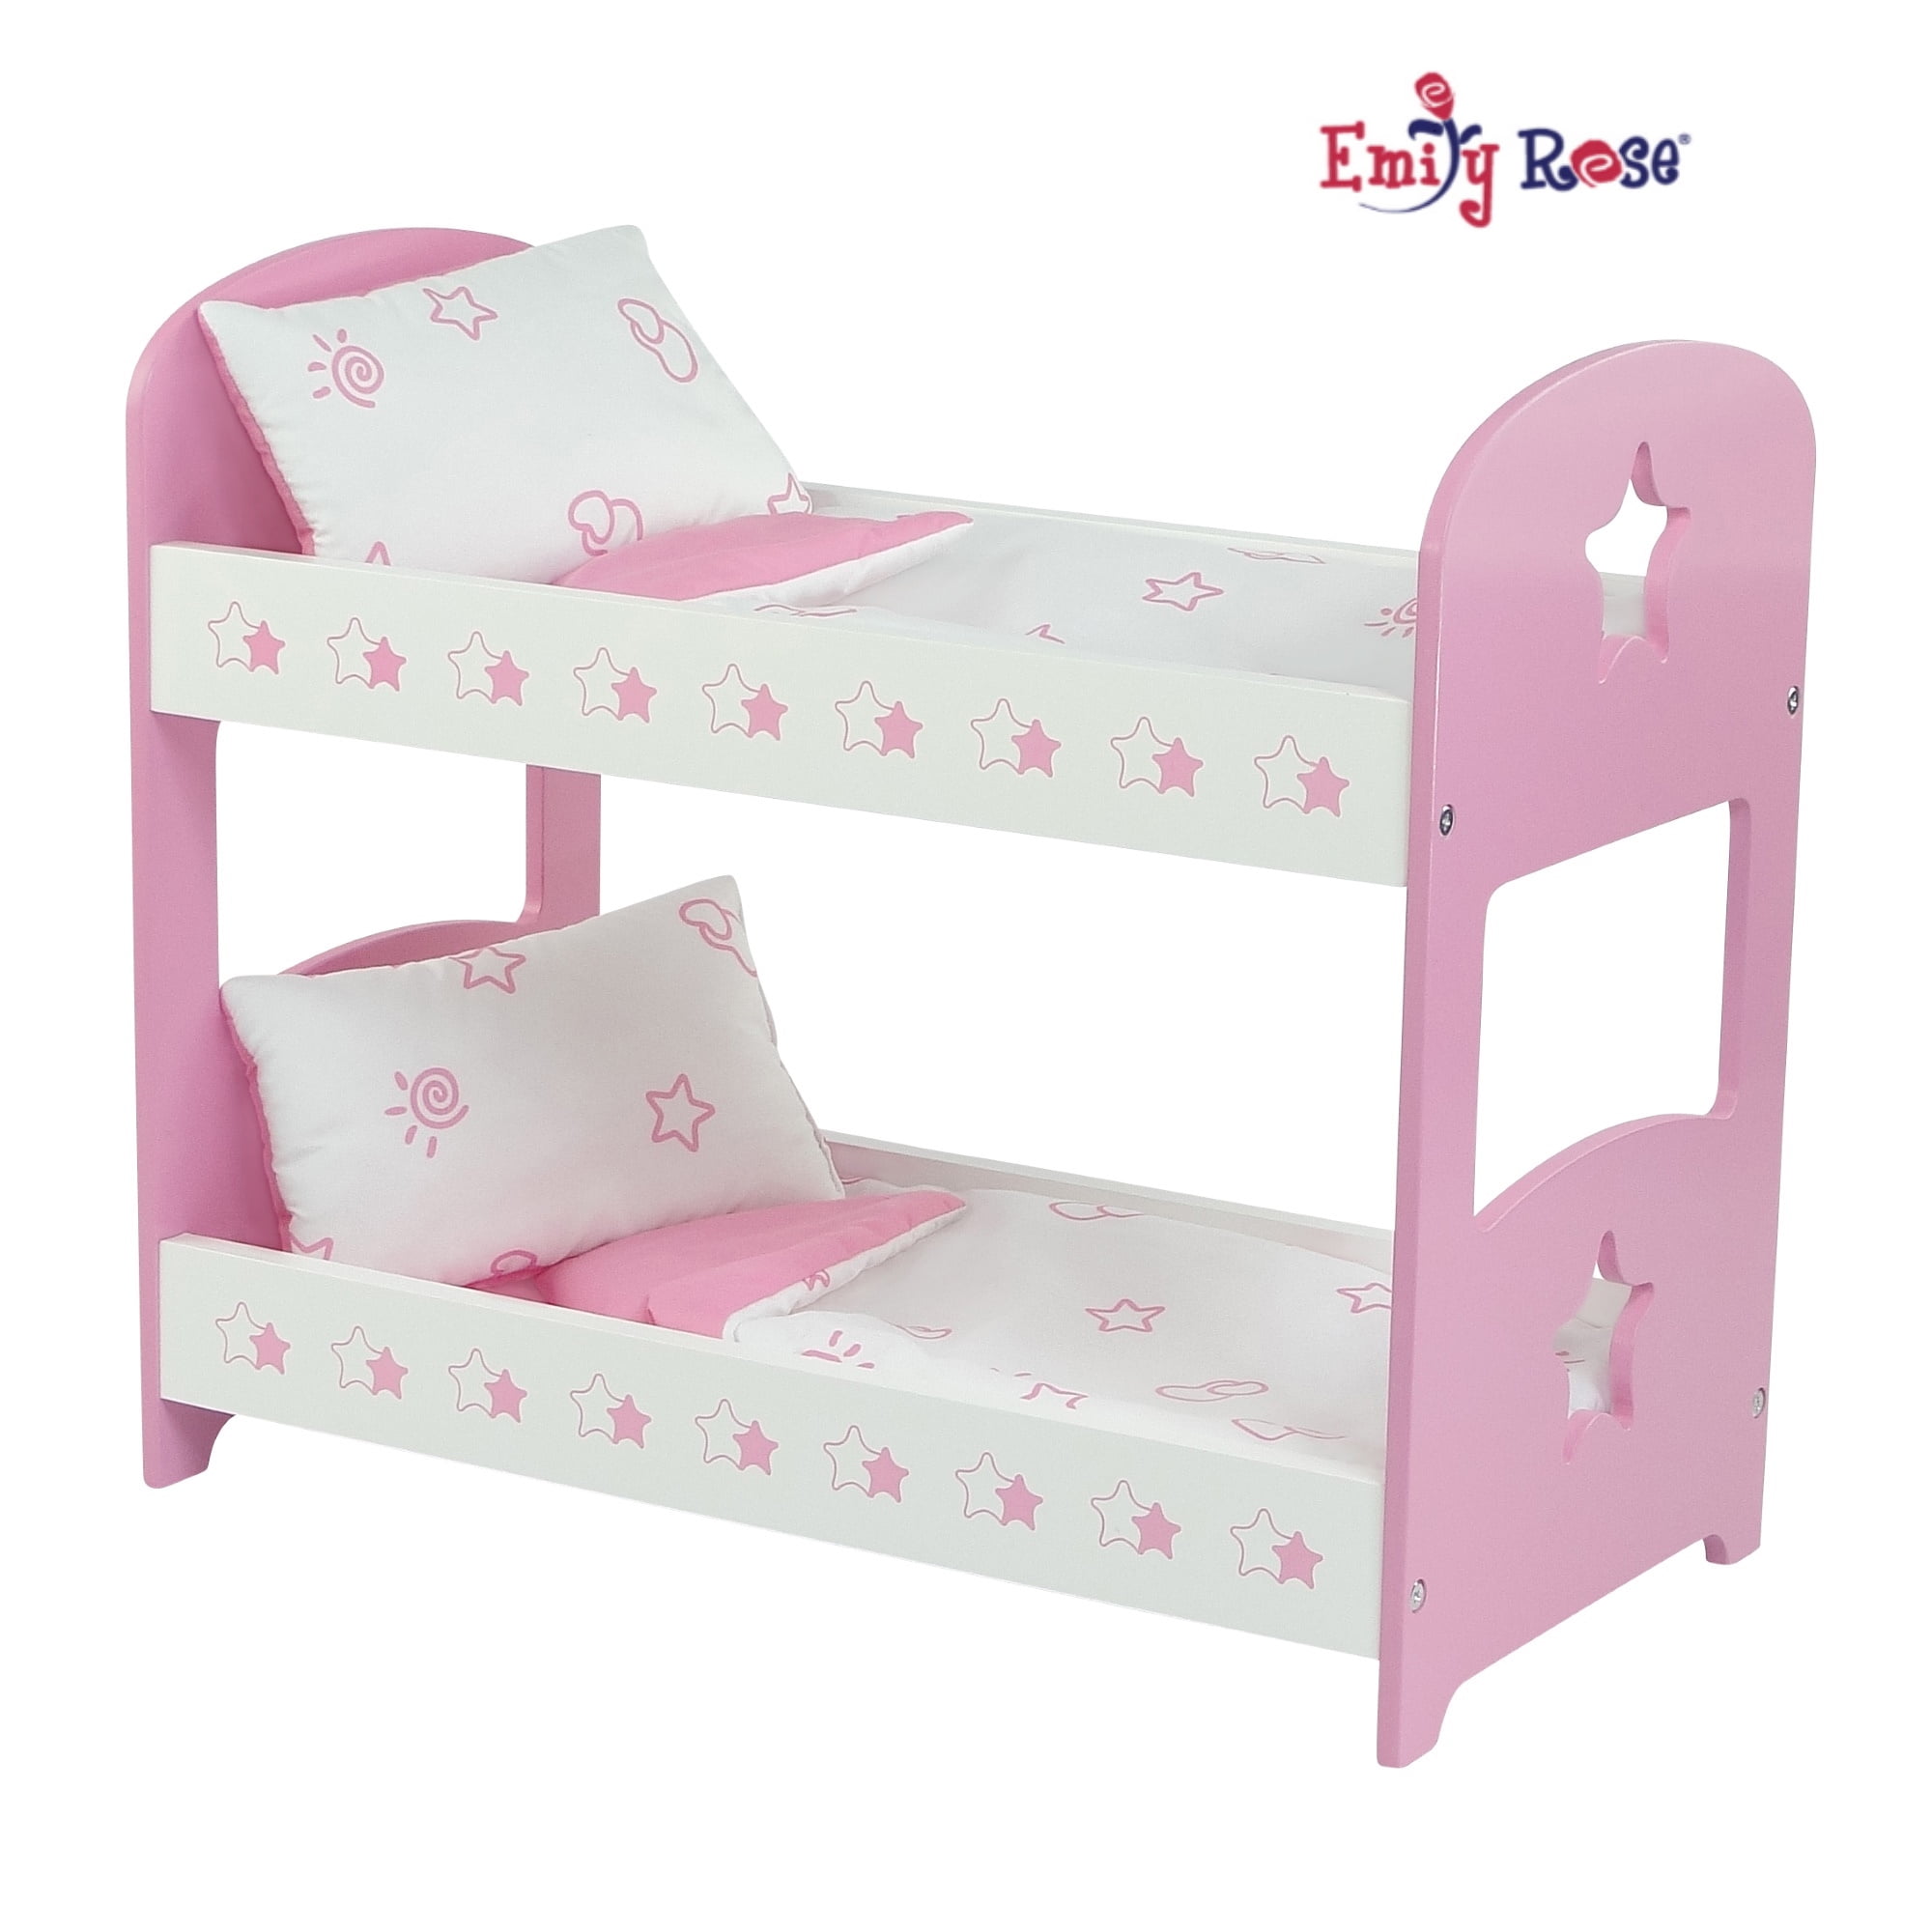 18 Inch Doll Bunk Bed Furniture, Dolls Wooden Bunk Beds